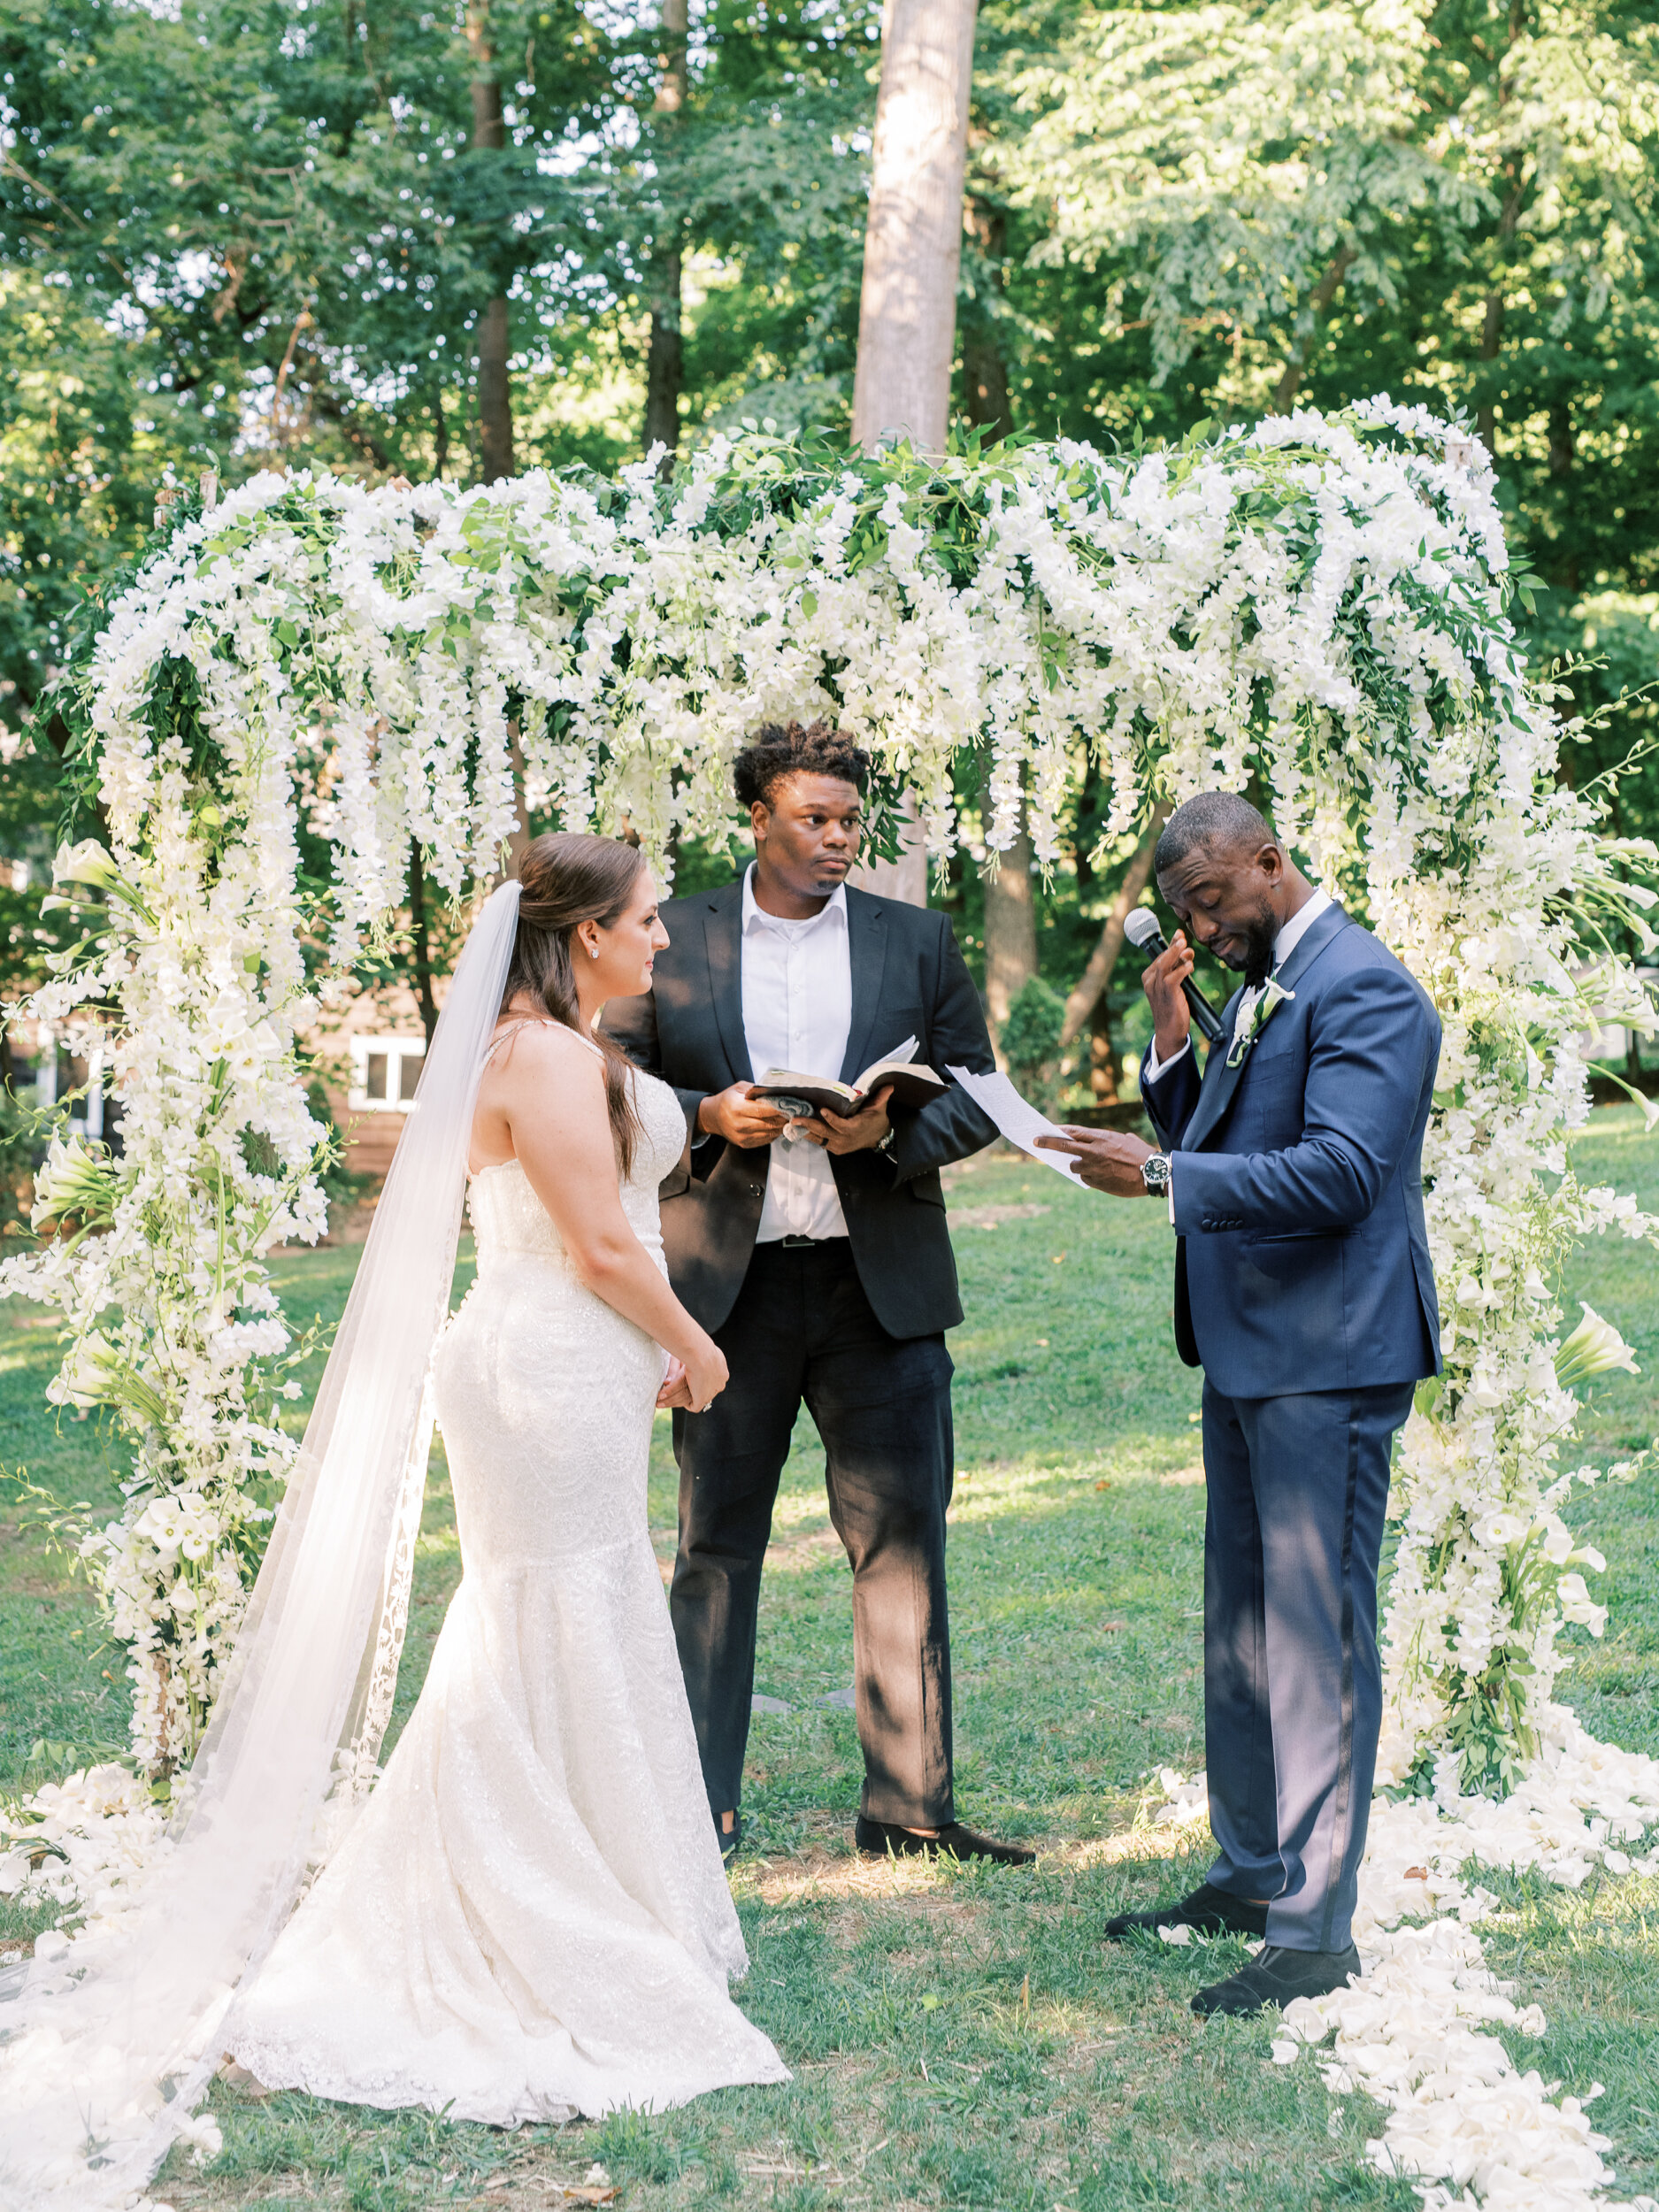 Bride and groom exchange vows at micro wedding in New York City 